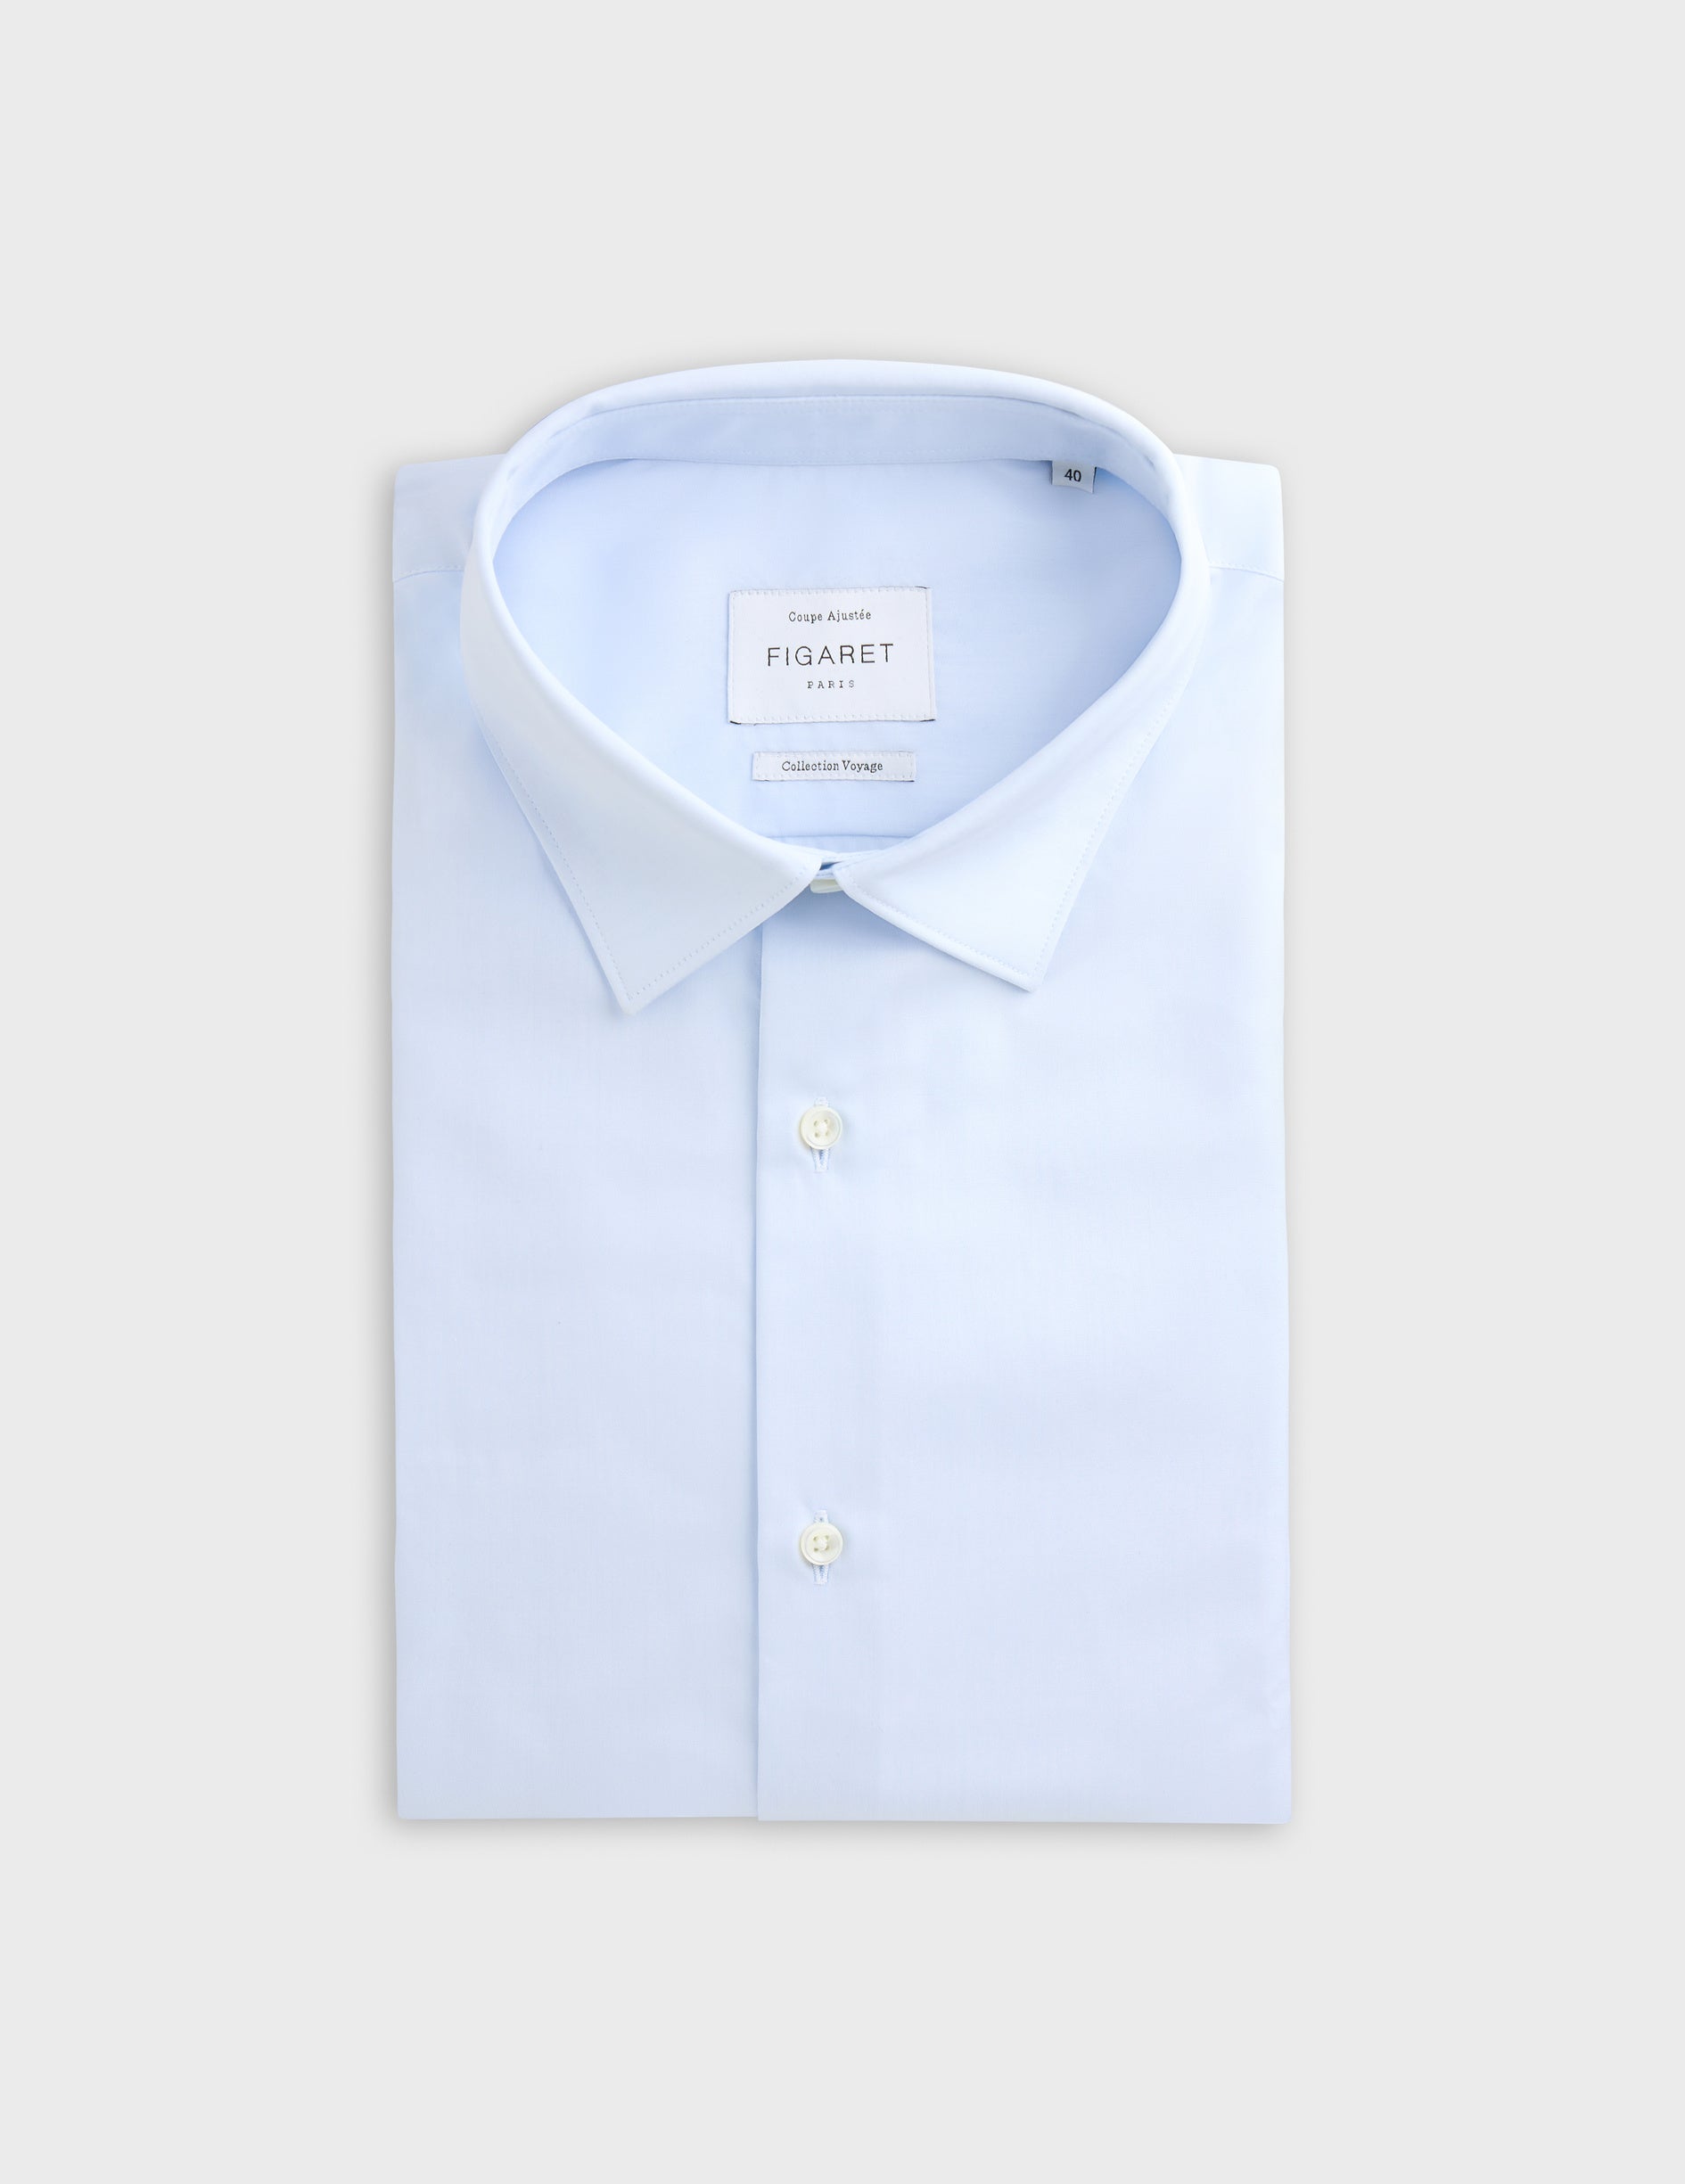 Fitted blue wrinkle-free shirt - Poplin - Figaret Collar